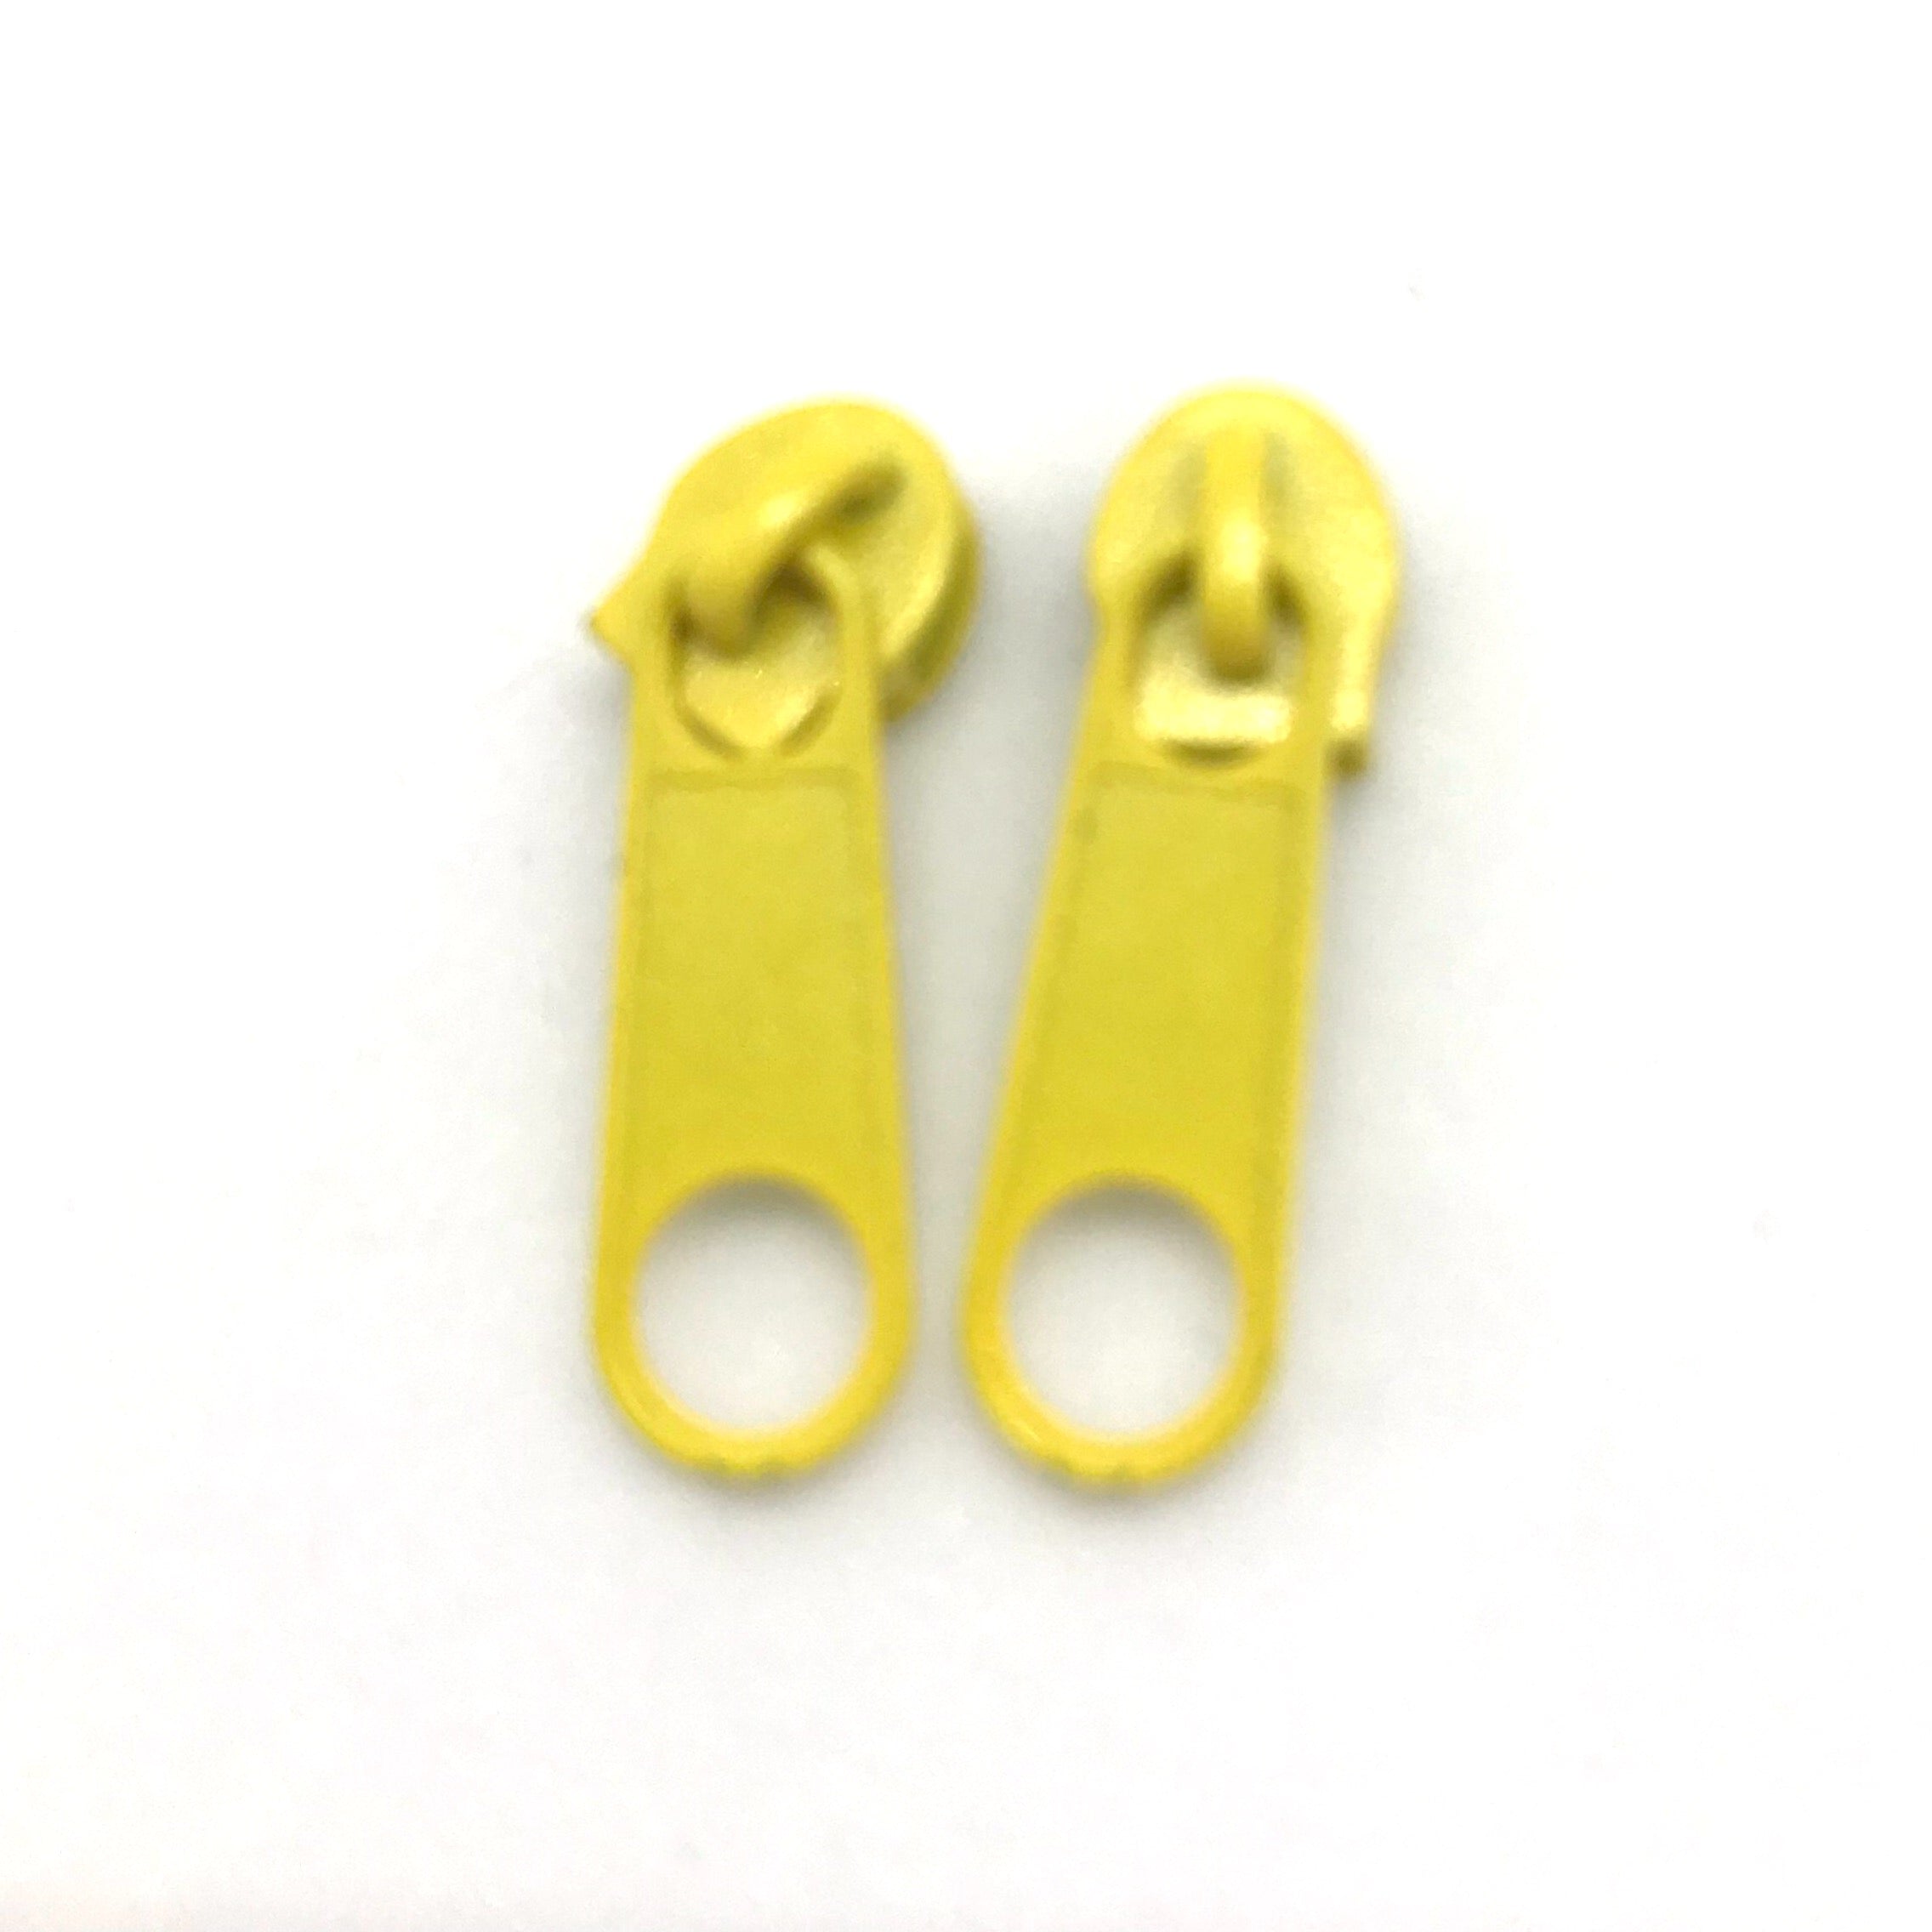 Yellow continuous long chain zipper tape and sliders